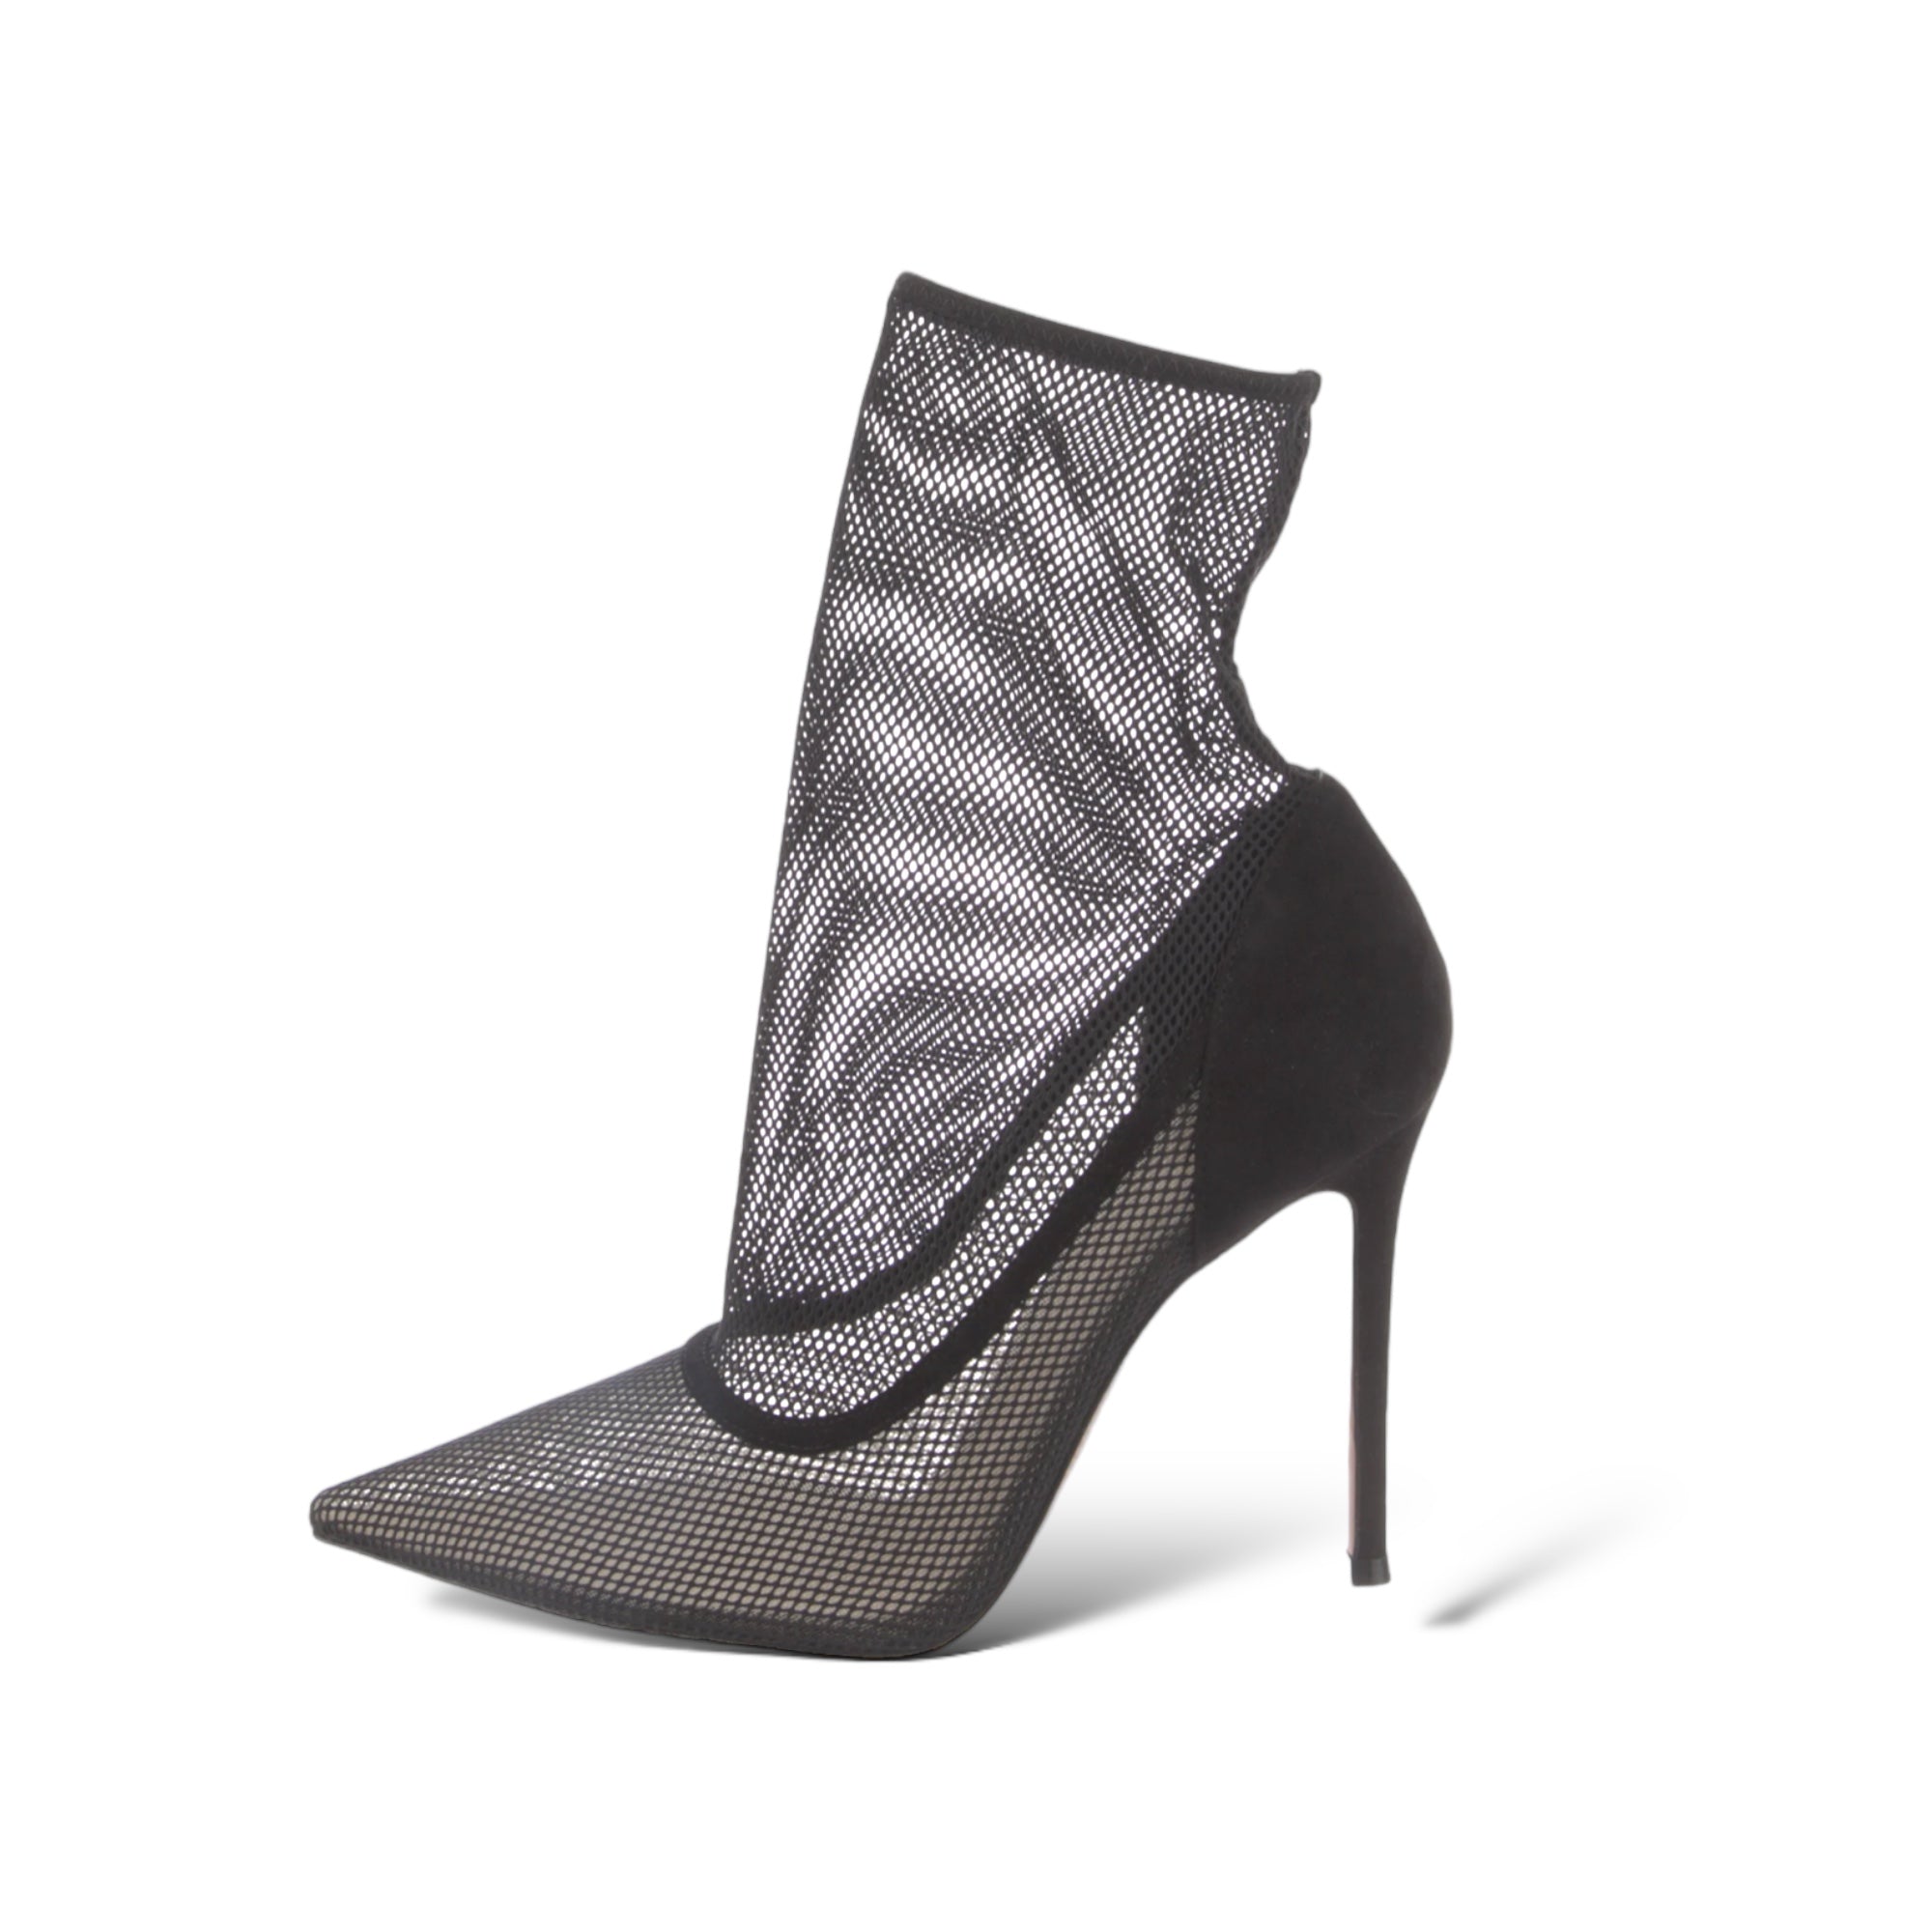 GIANVITO ROSSI Mesh Ankle High Pumps |Size: 8.5 | IT 38.5|